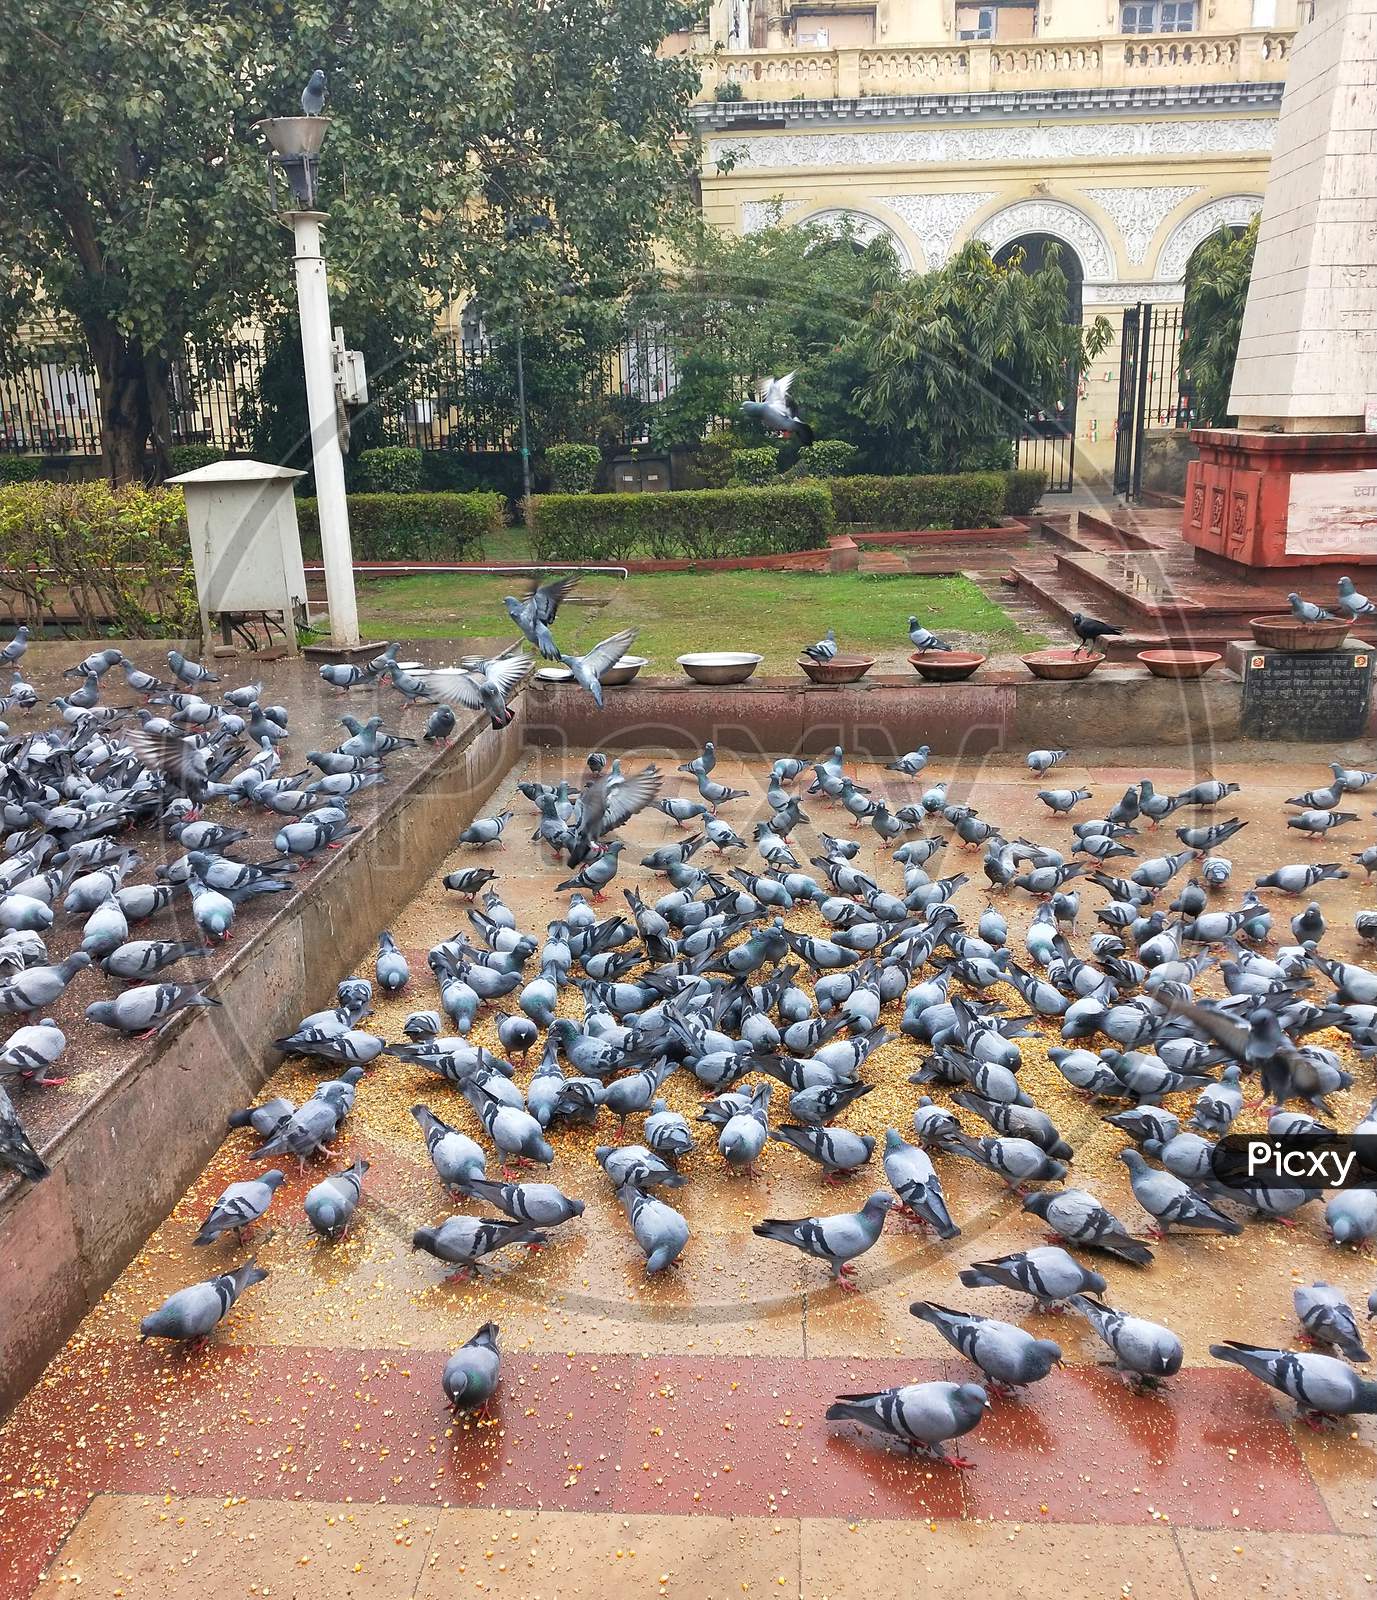 Pigeons are biting the bait